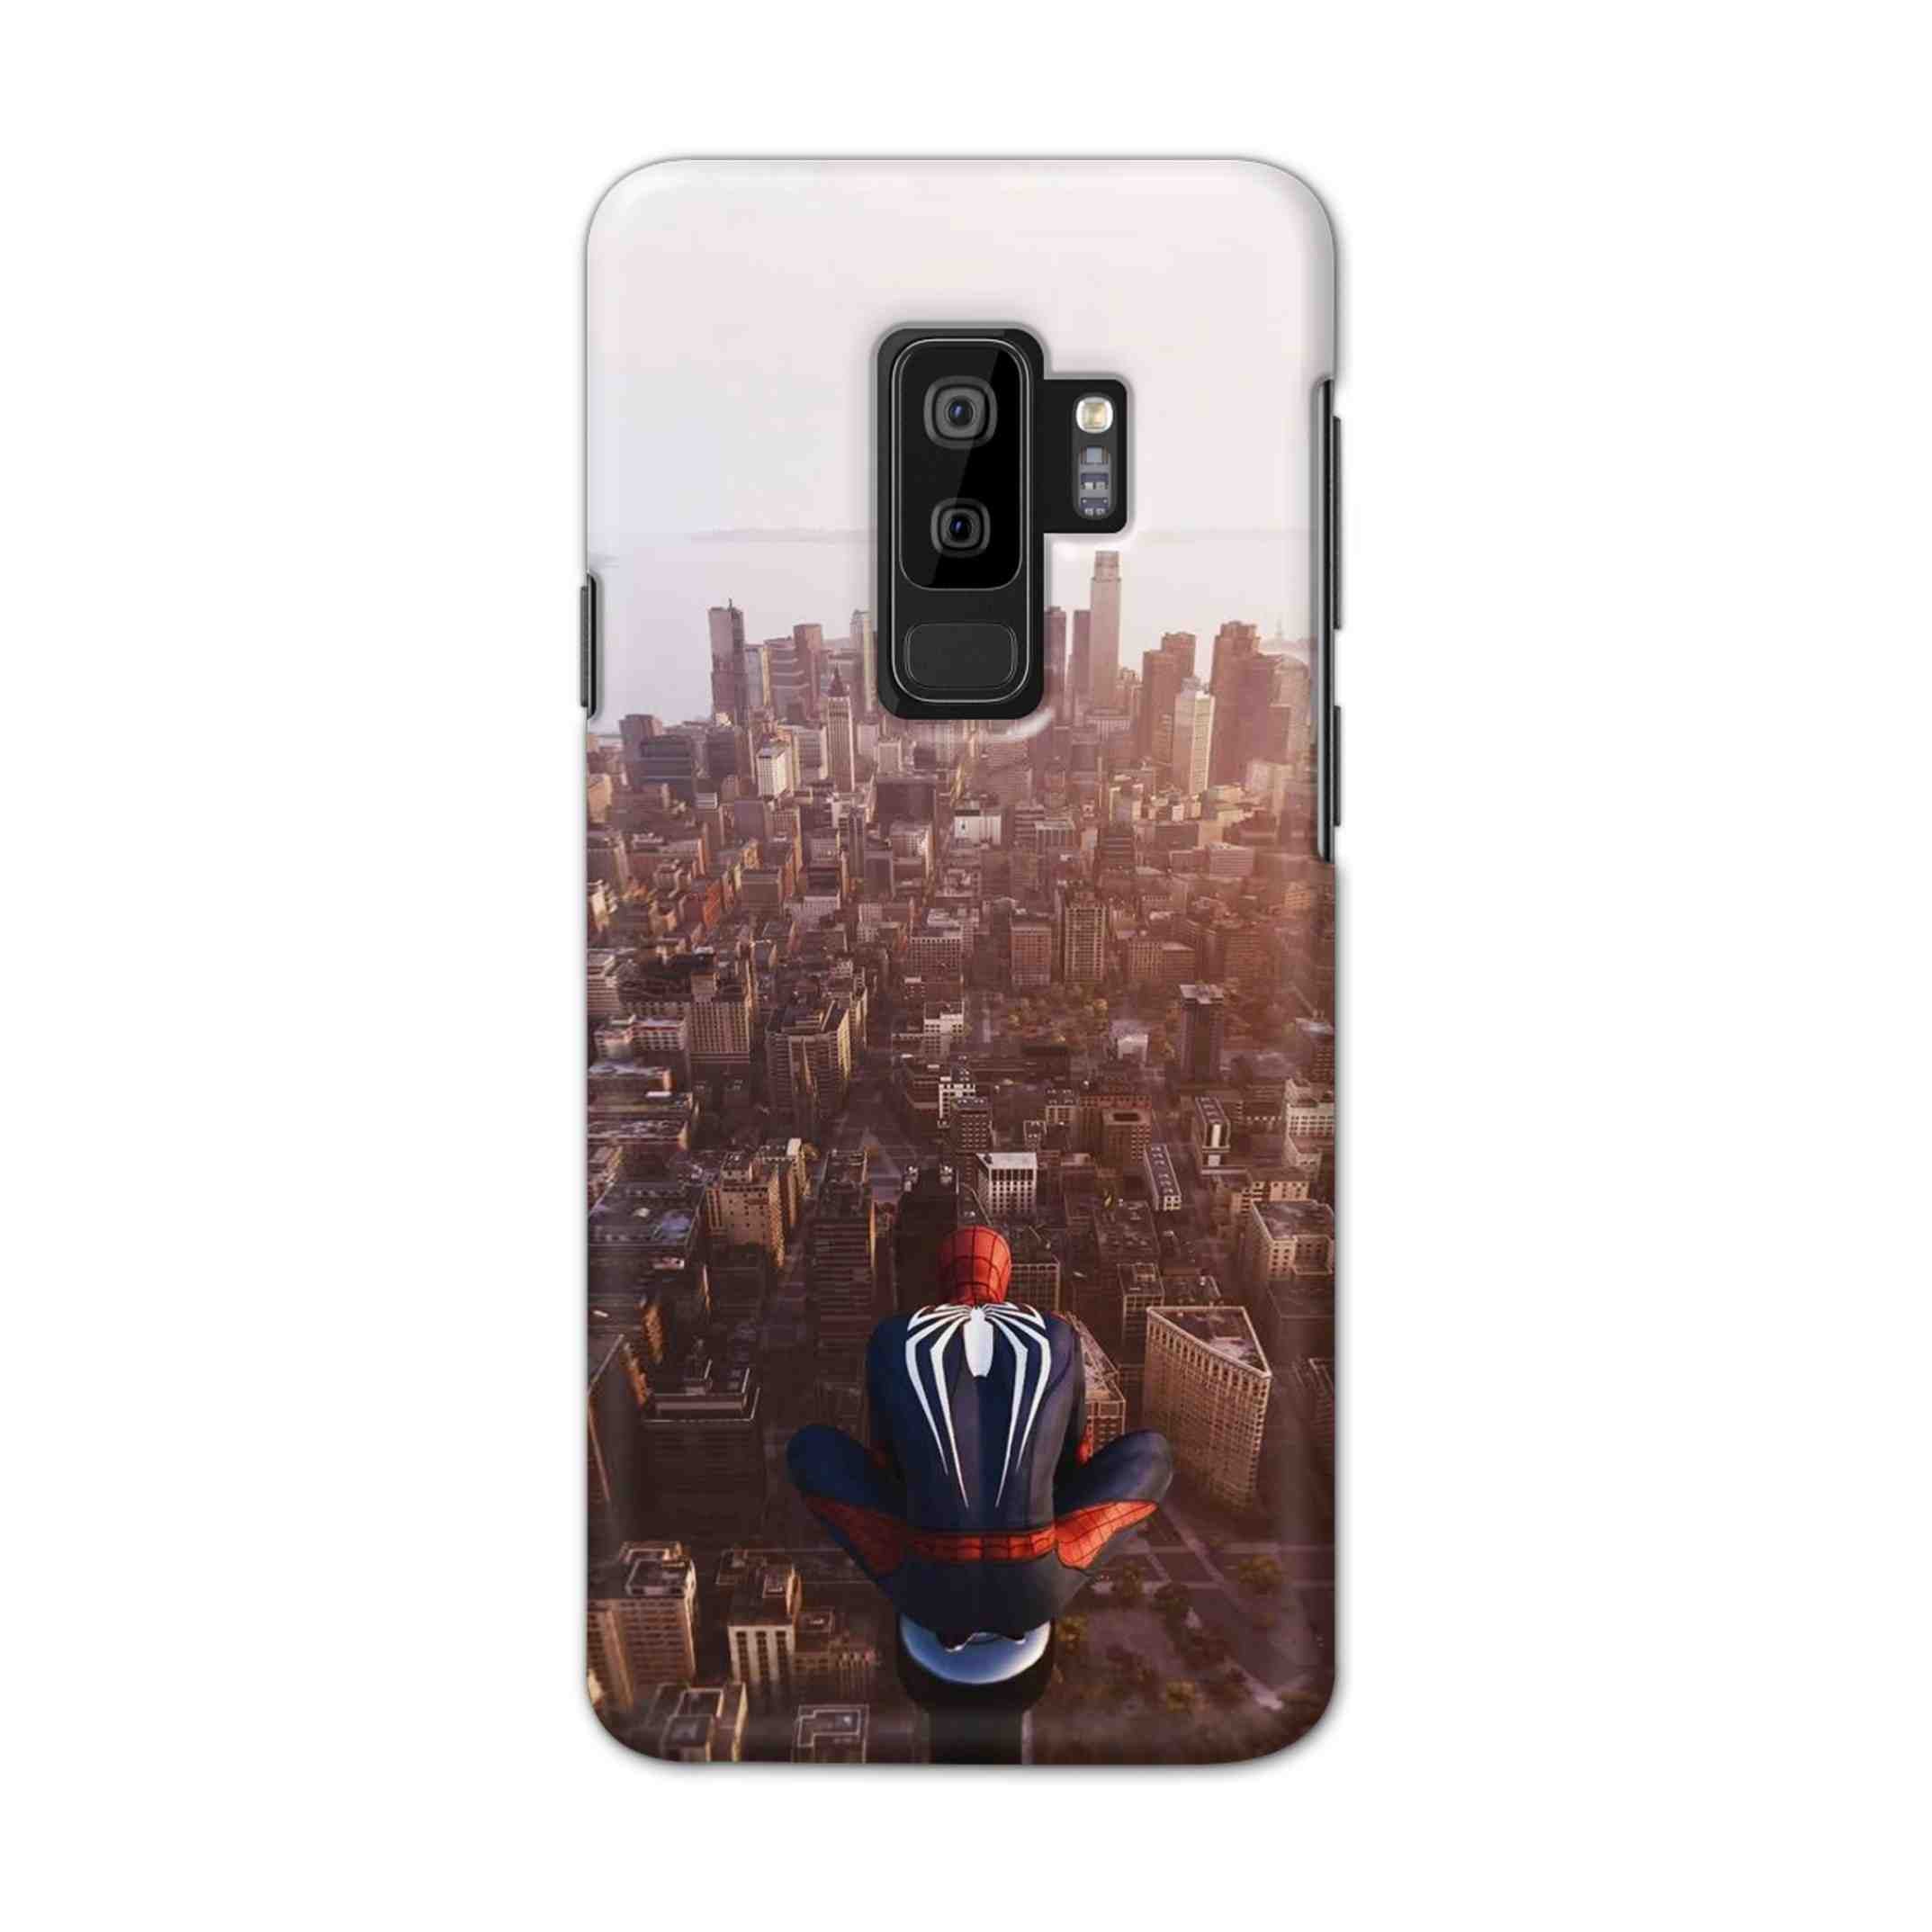 Buy City Of Spiderman Hard Back Mobile Phone Case Cover For Samsung S9 plus Online